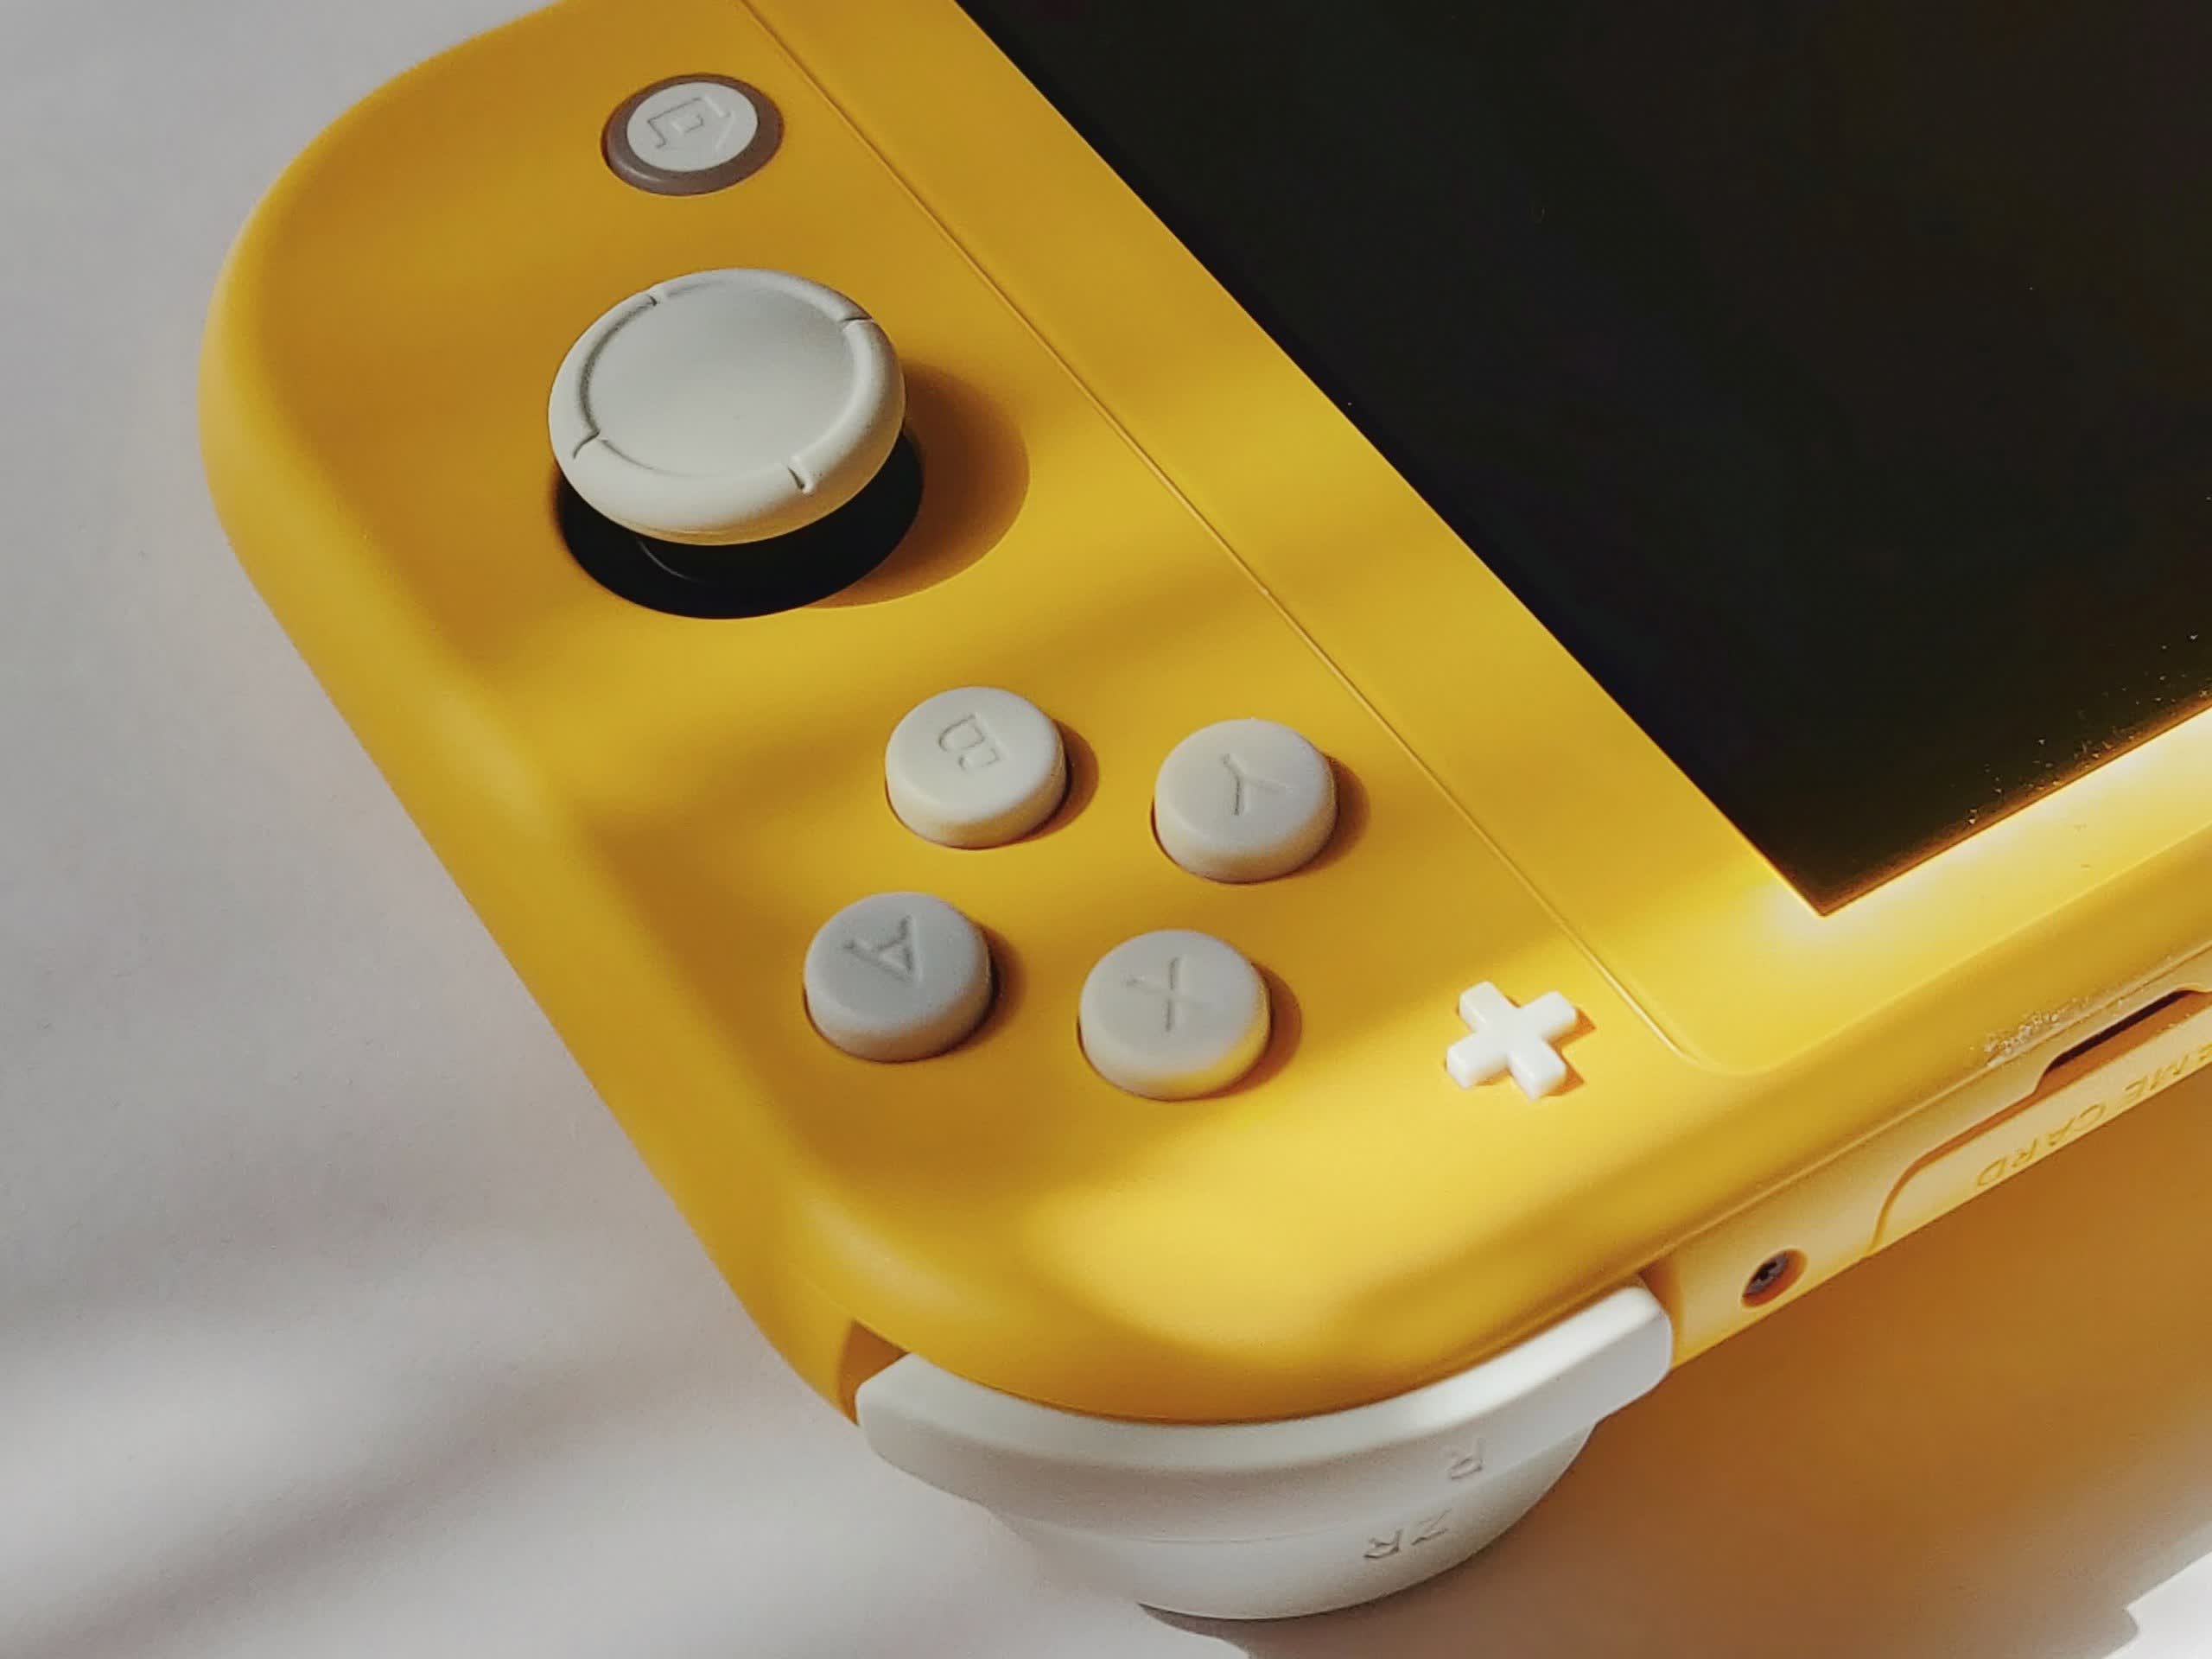 Nintendo says its original console will birth throughout the next Seventy nine years